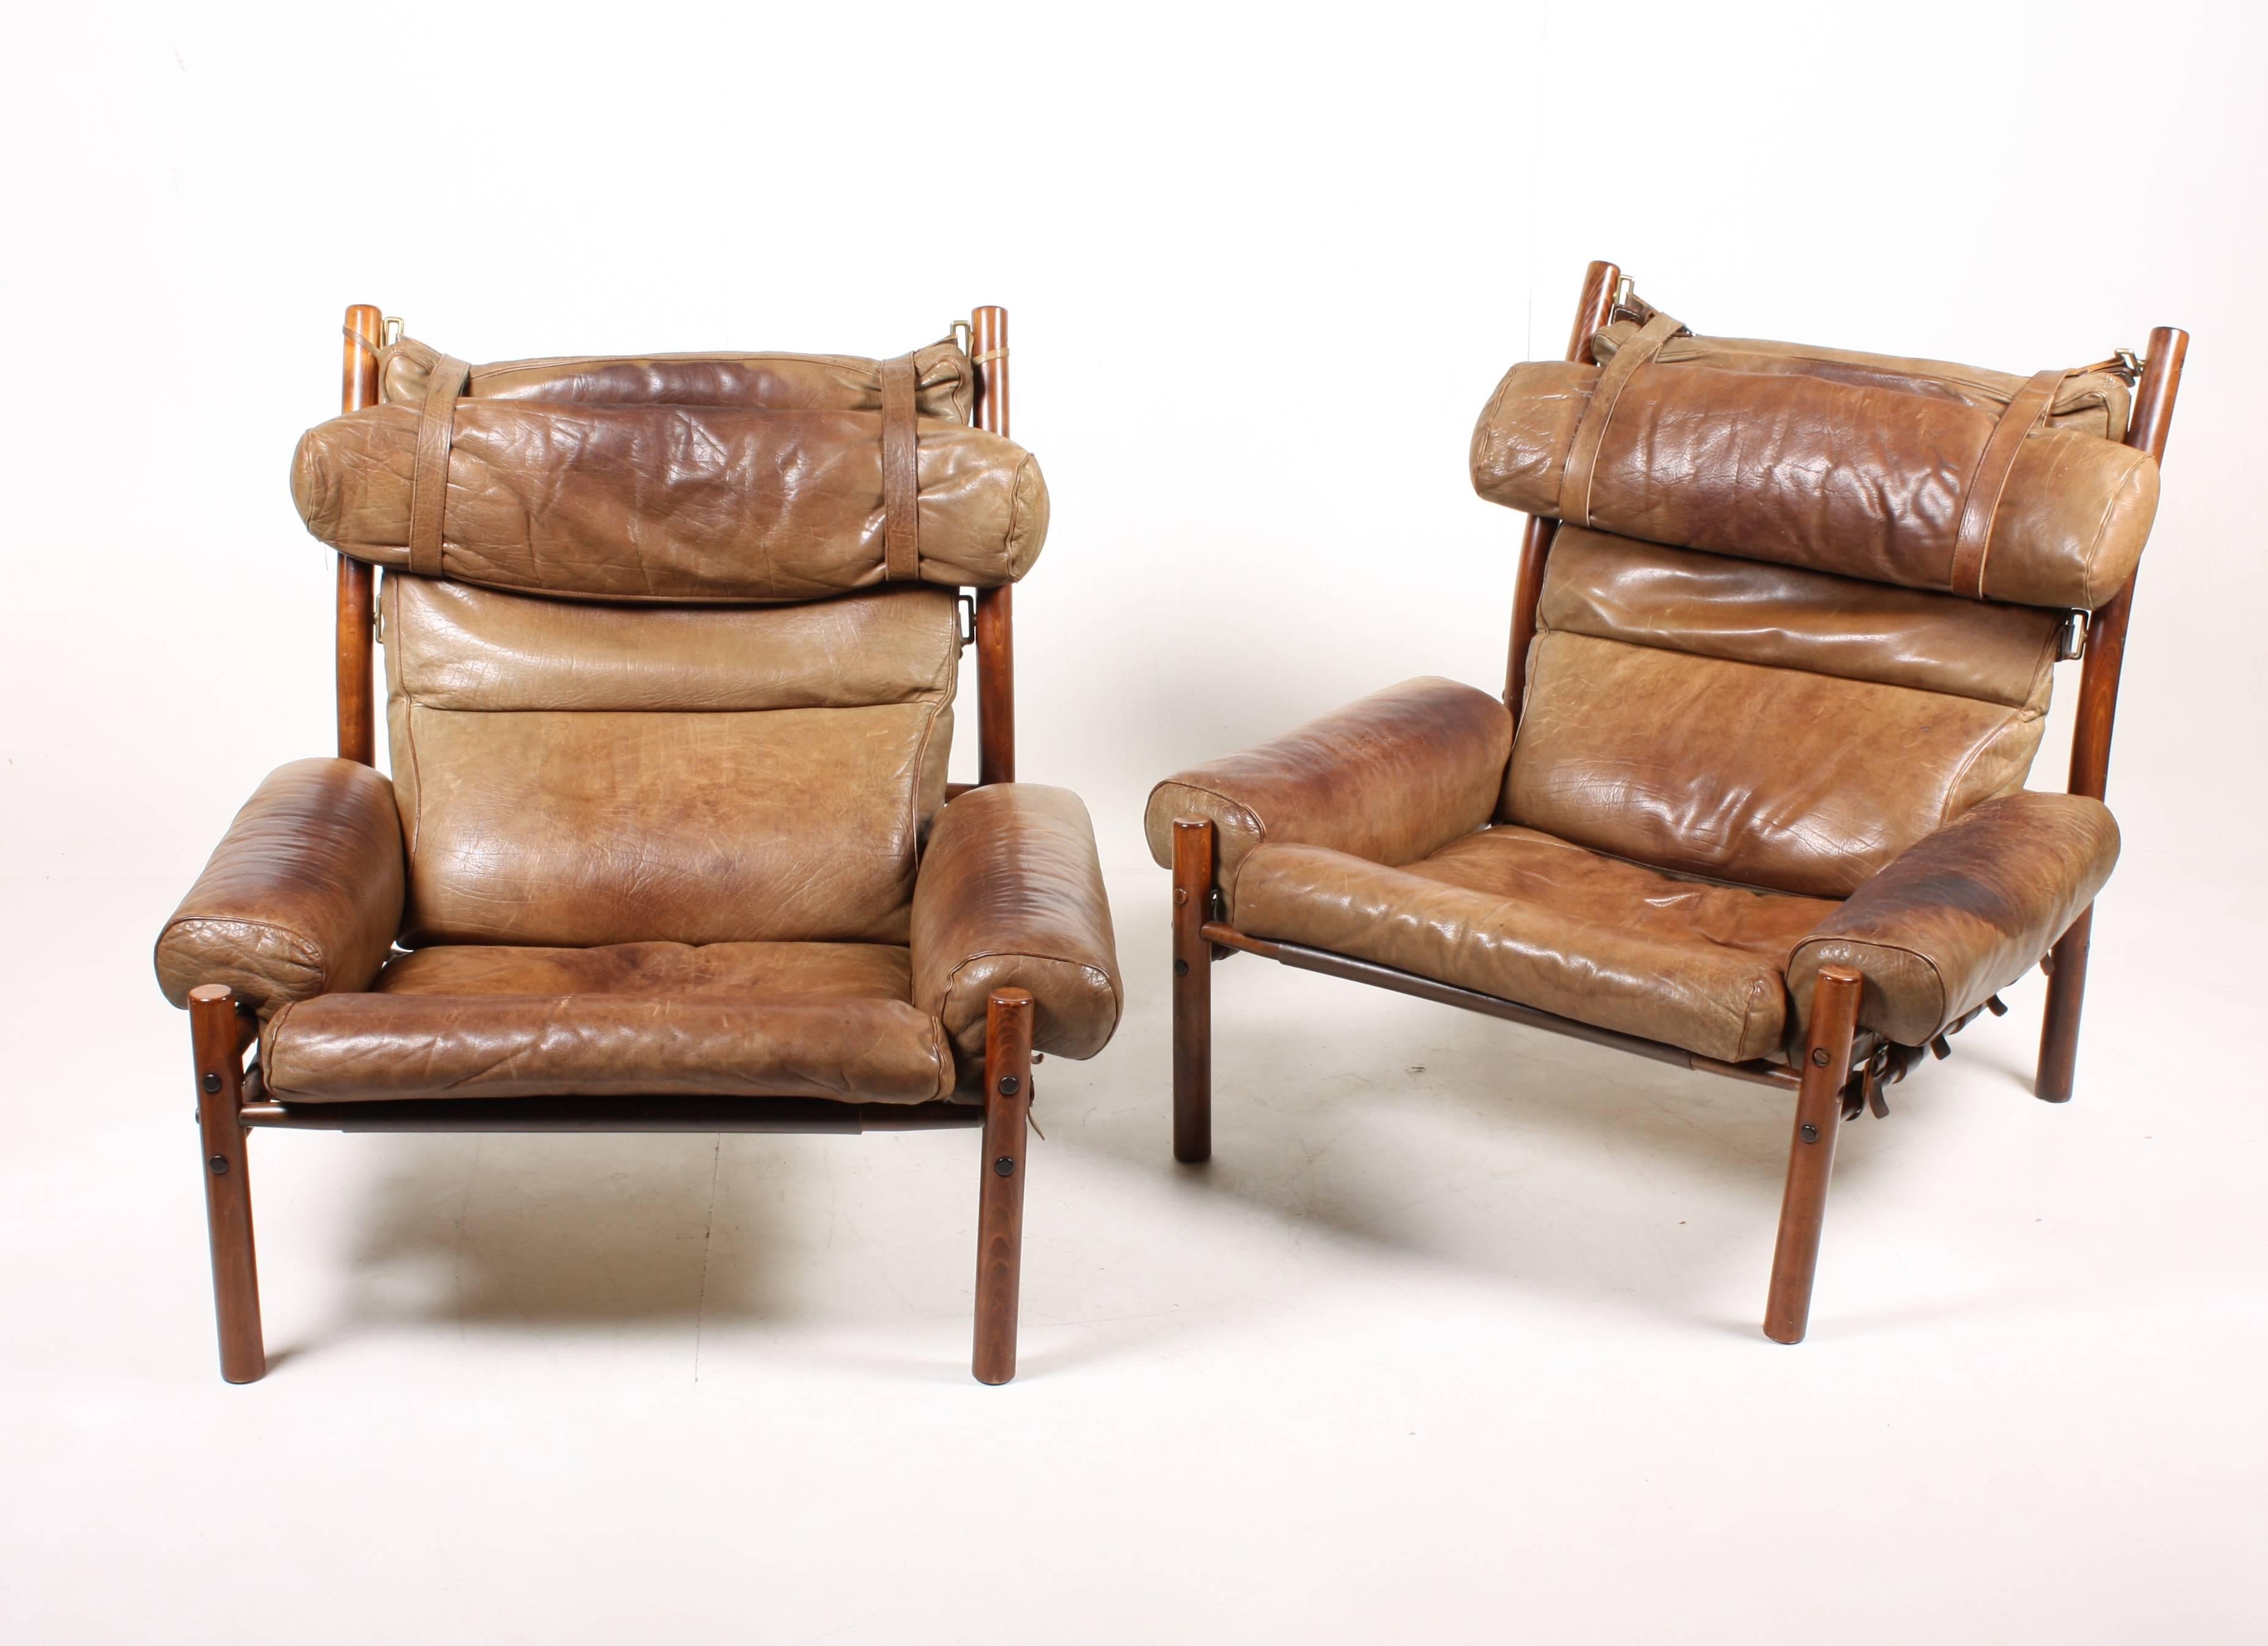 Pair of Inca series lounge chairs in patinated leather designed by Arne Norell in 1968. Made by Norell Möbel AB in Sweden. Great original condition.